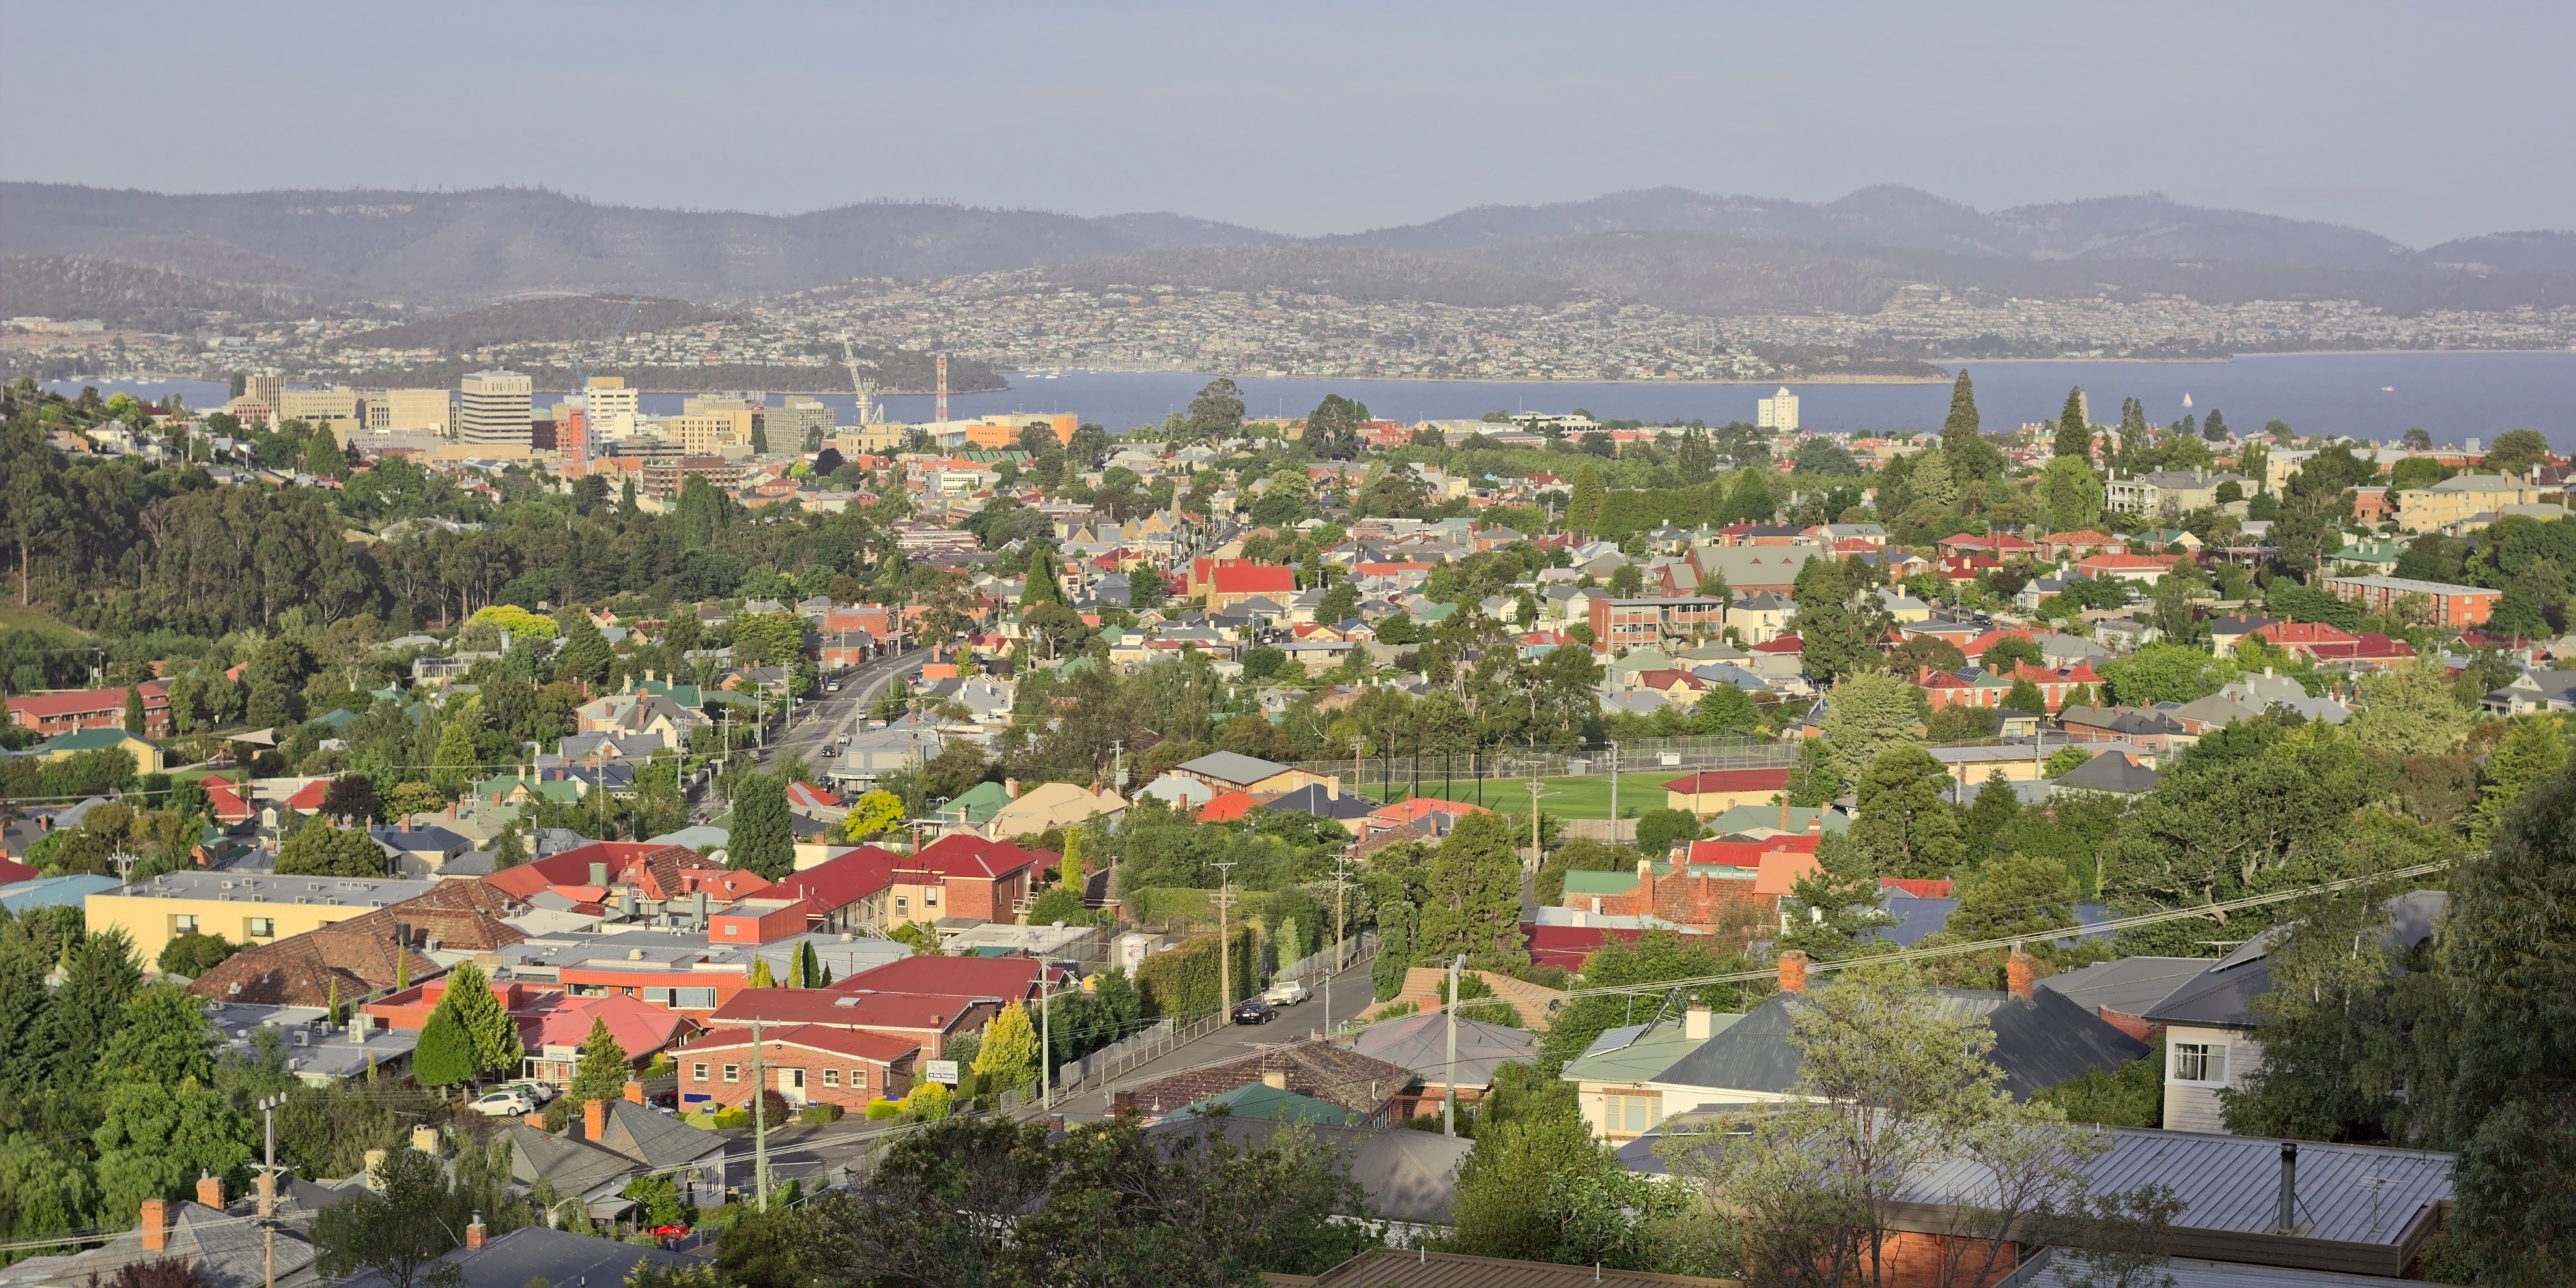 Hobart seen from the east